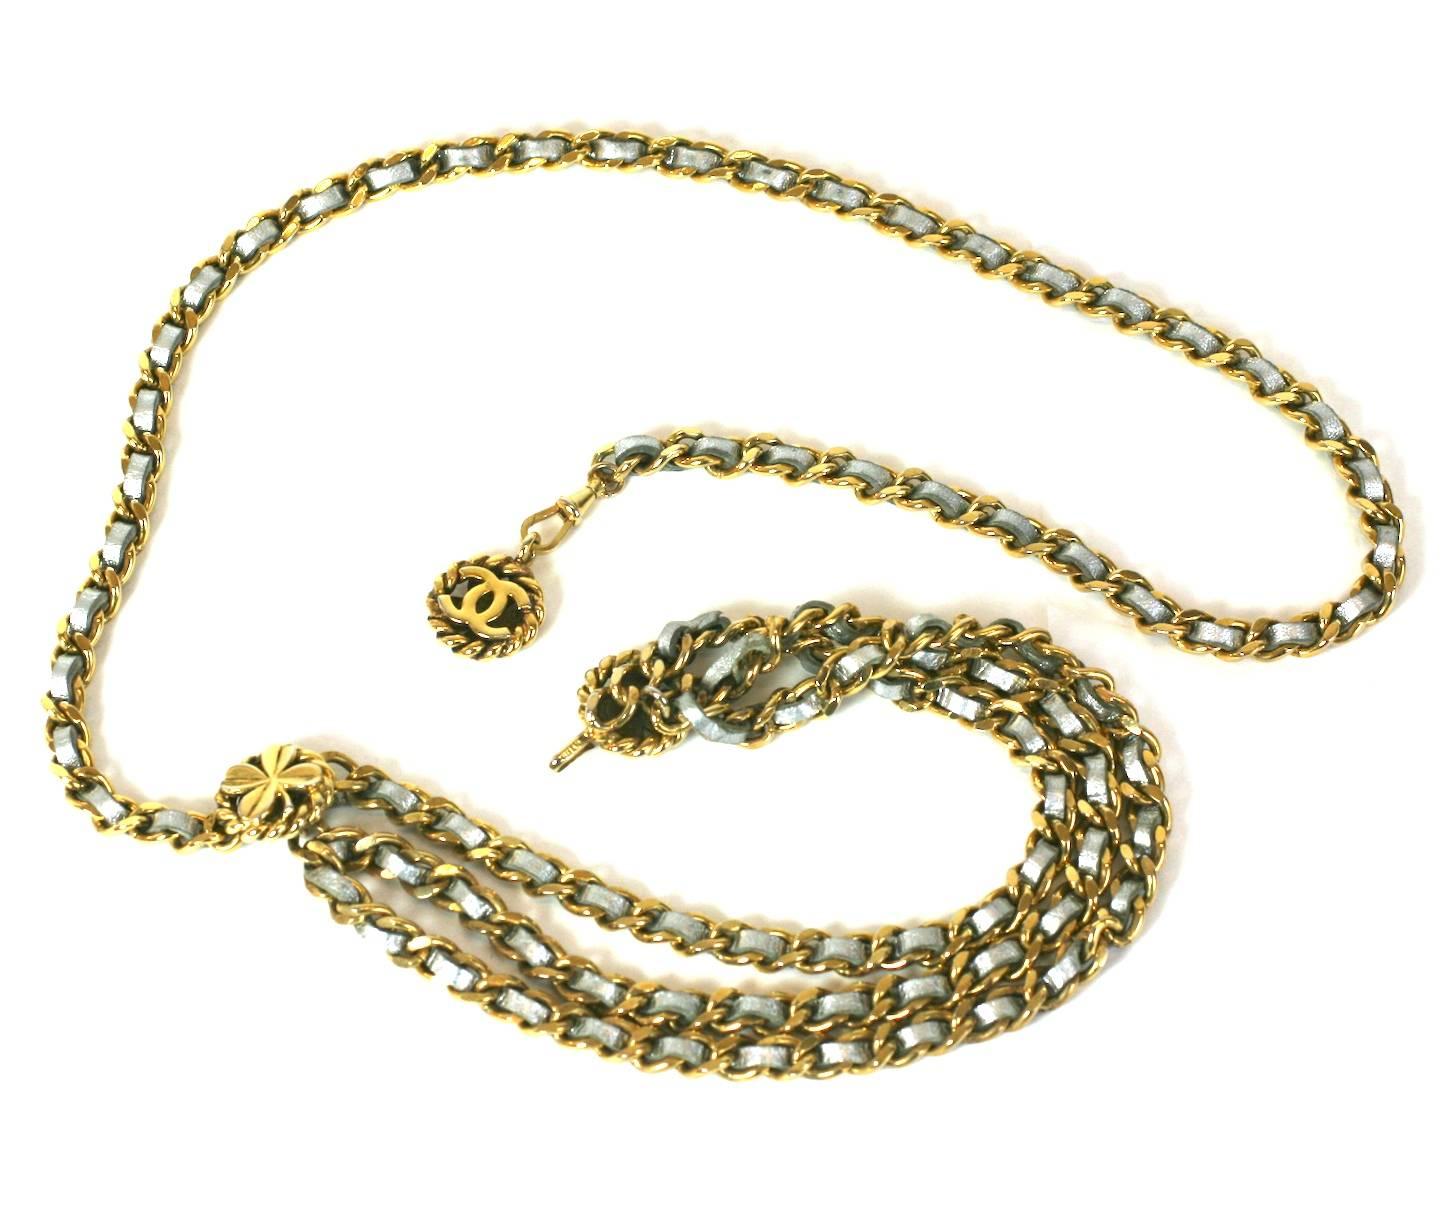 Chanel silver kid and gilt metal swag belt. Signature style with 3 chains in front. The addition of the silver leather threaded through the chain updates this iconic style. Clover charms on belt and a reversible fob at end with 